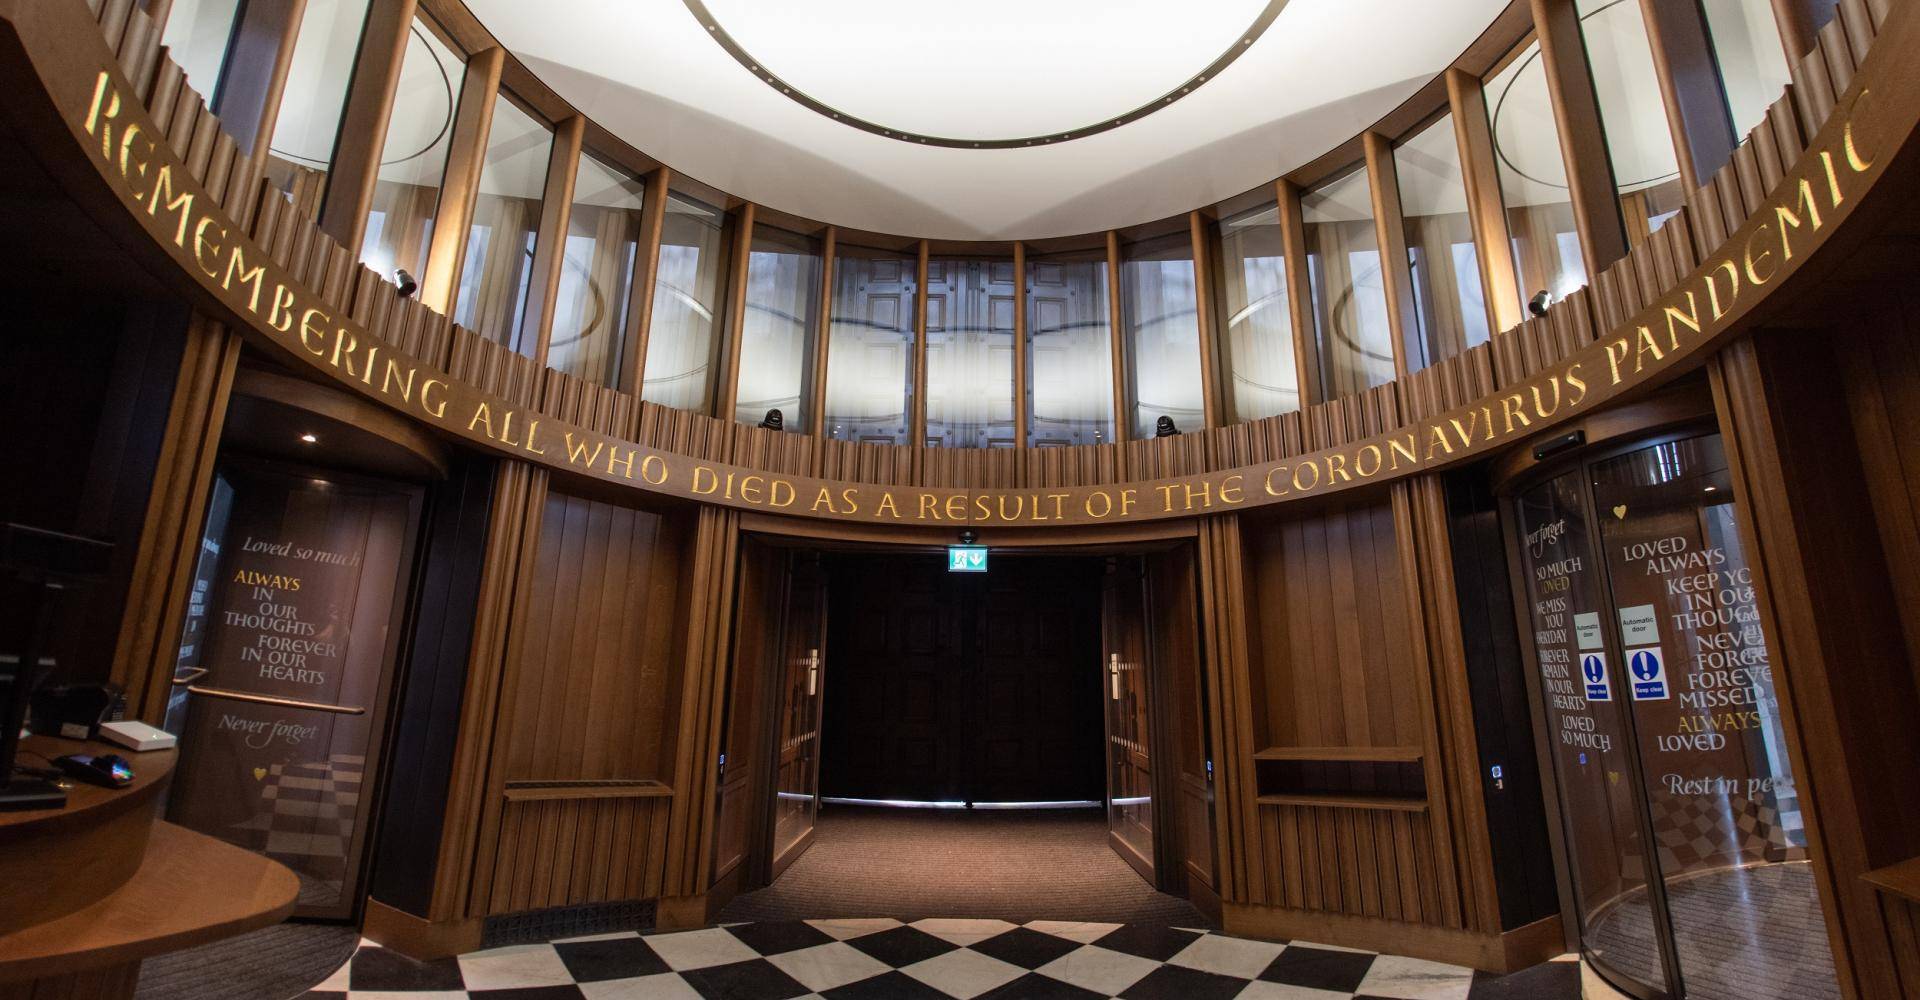 The wooden elliptical interior of the Remember Me inner portico is shown reading 'Remembering all who died as a result of the coronavirus pandemic'